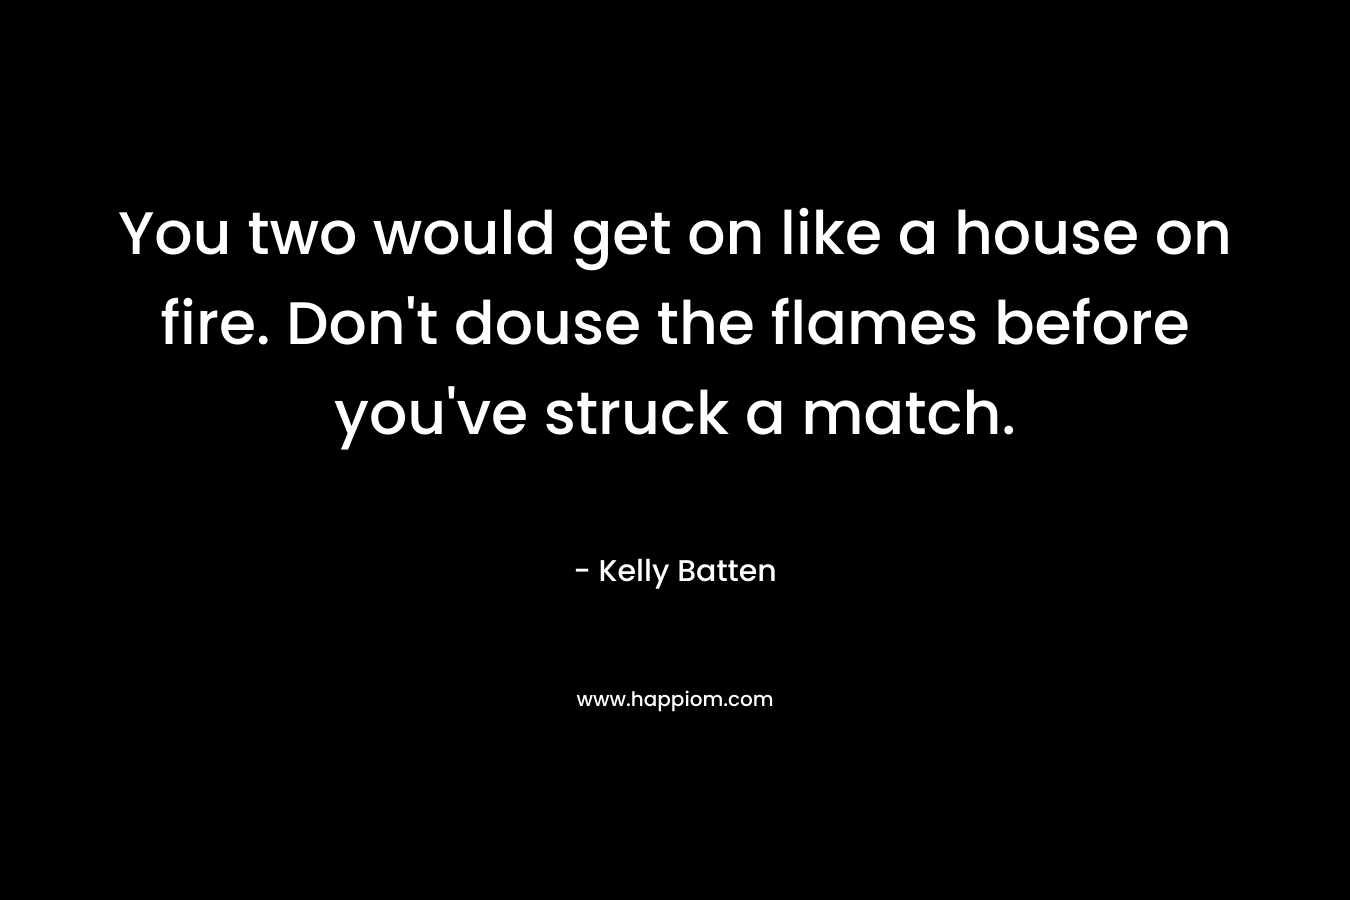 You two would get on like a house on fire. Don't douse the flames before you've struck a match.